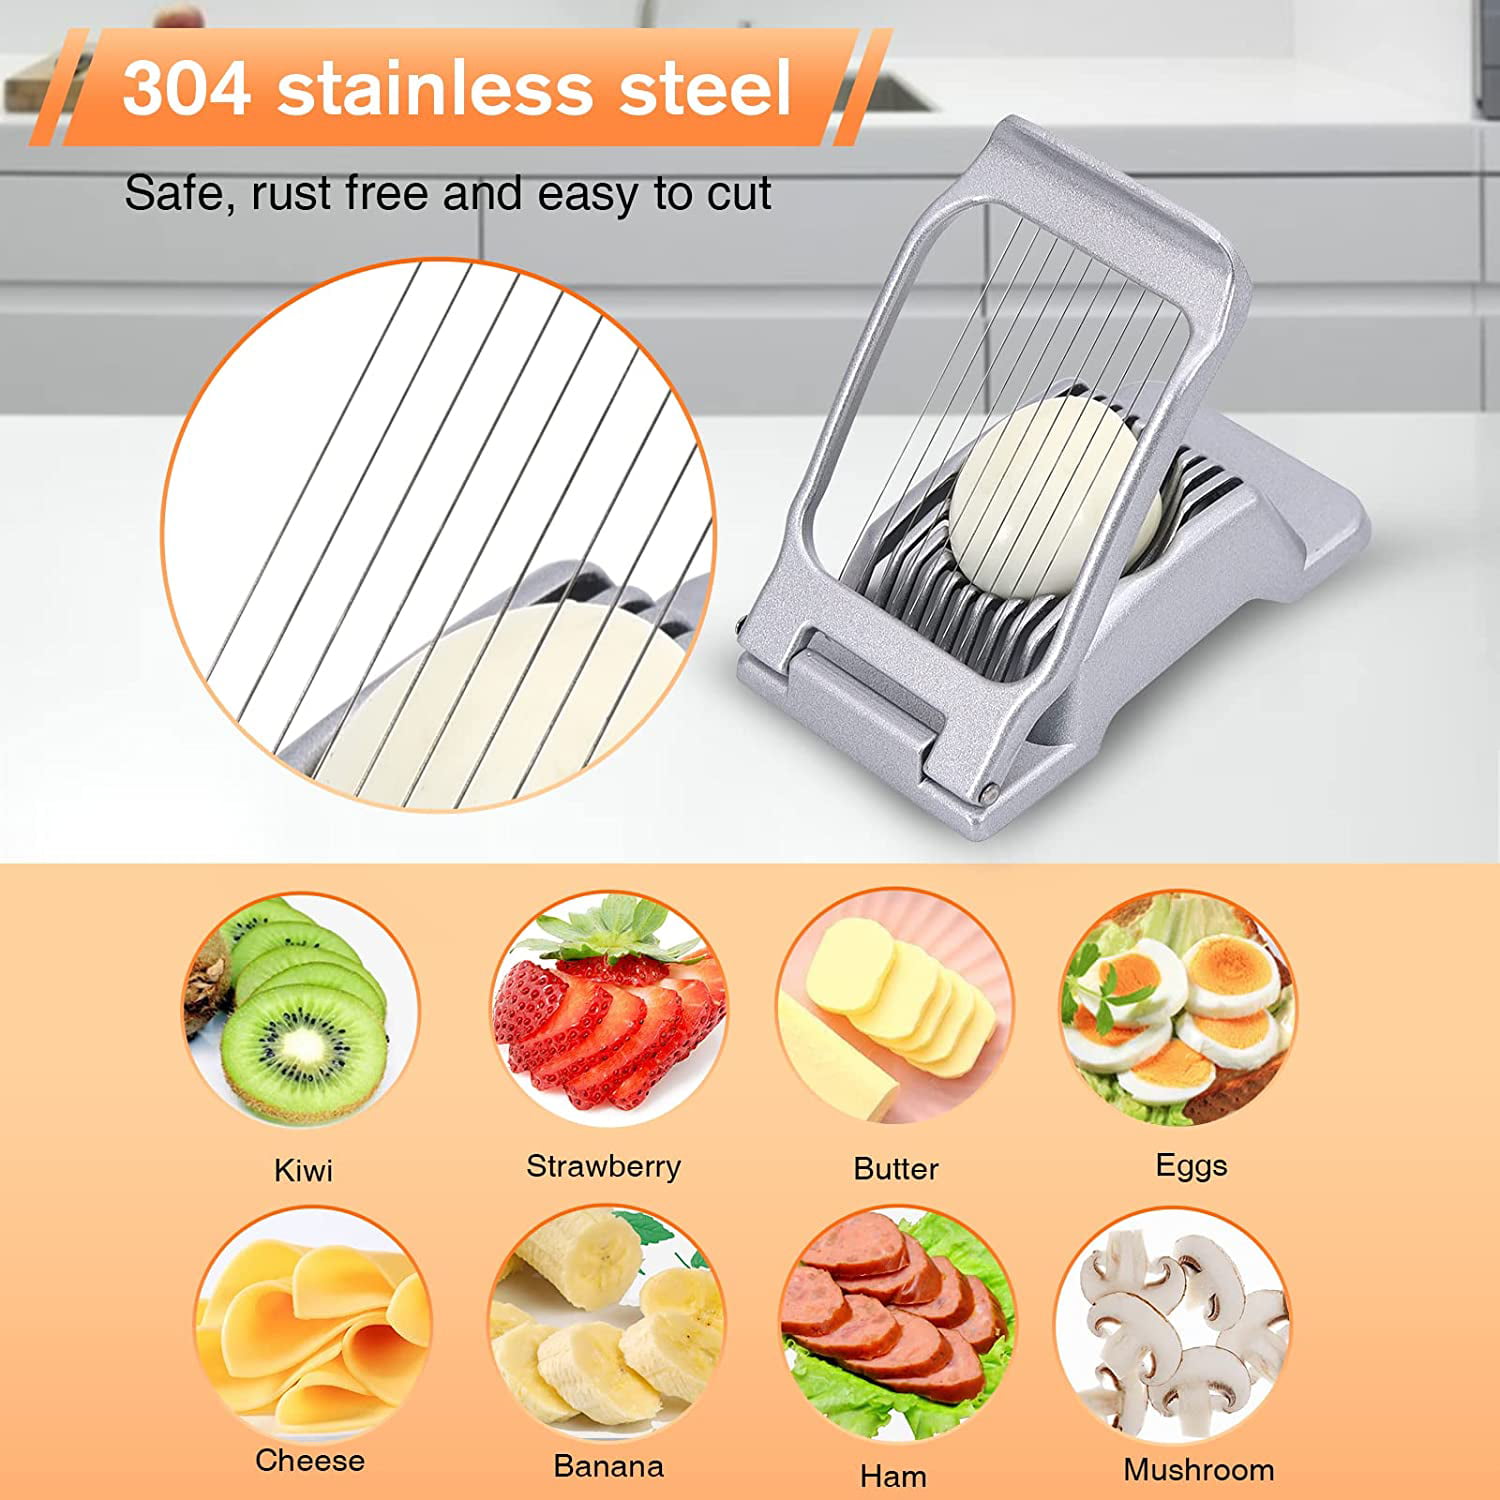 Egg slicer Misty 12cm by NAVA with stainless steel wires